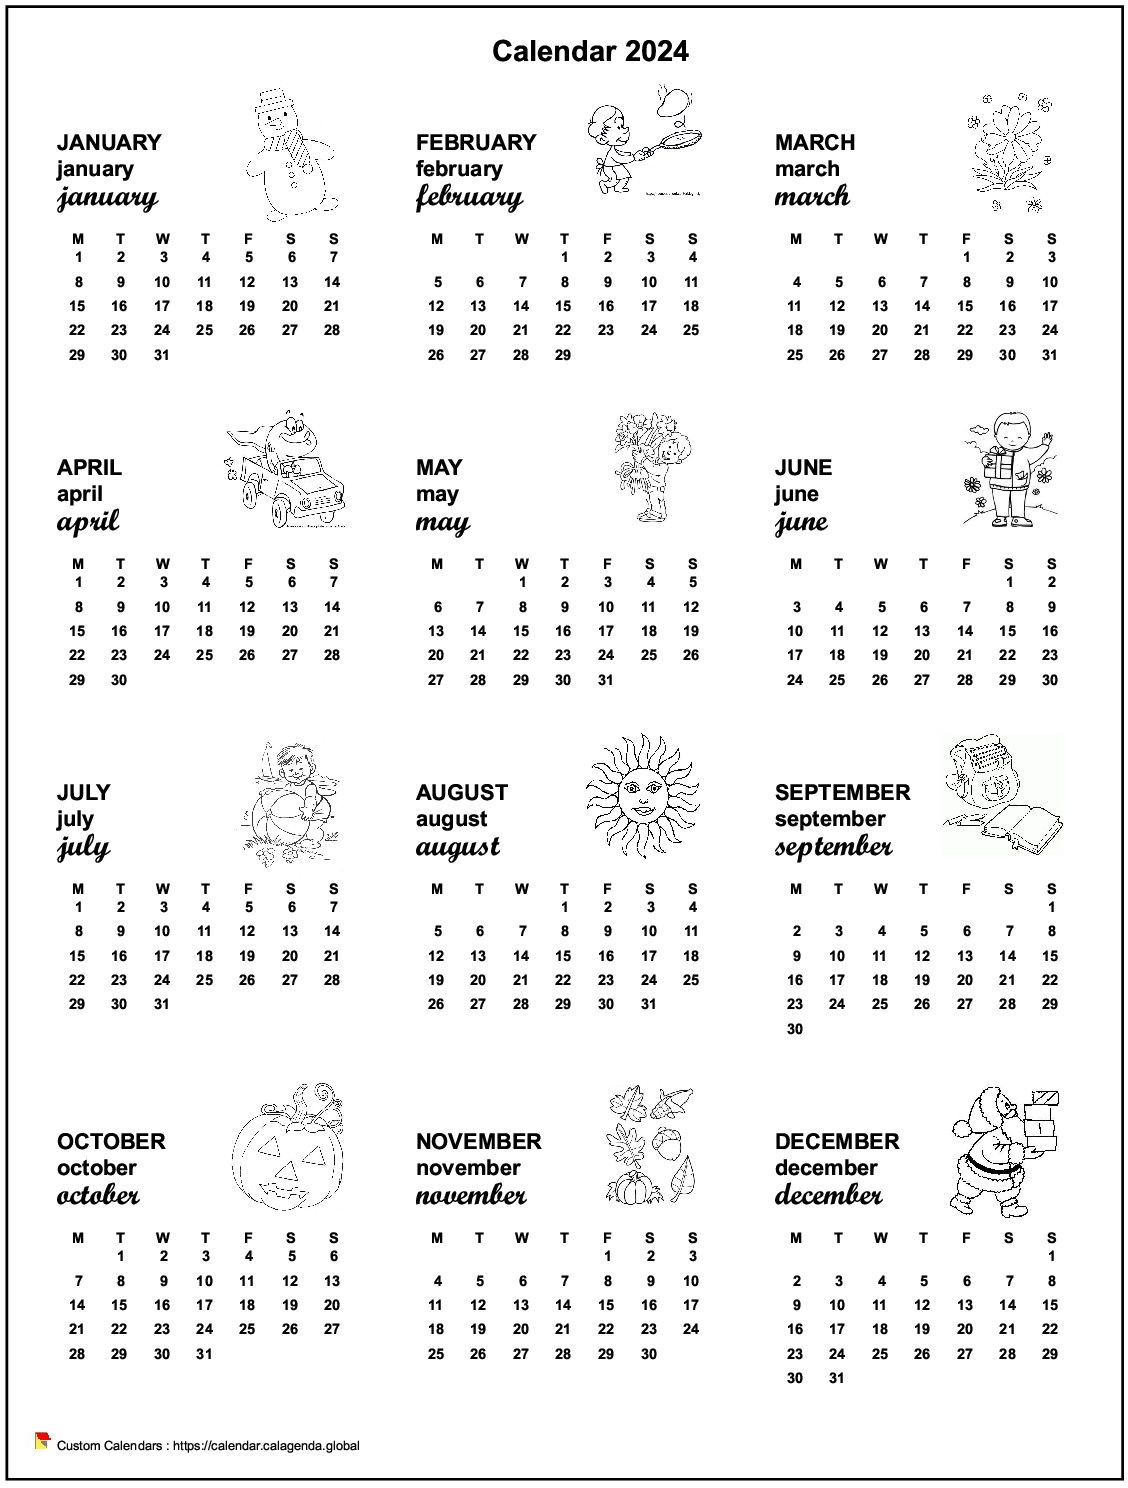 Calendar 2074 annual maternal and primary school